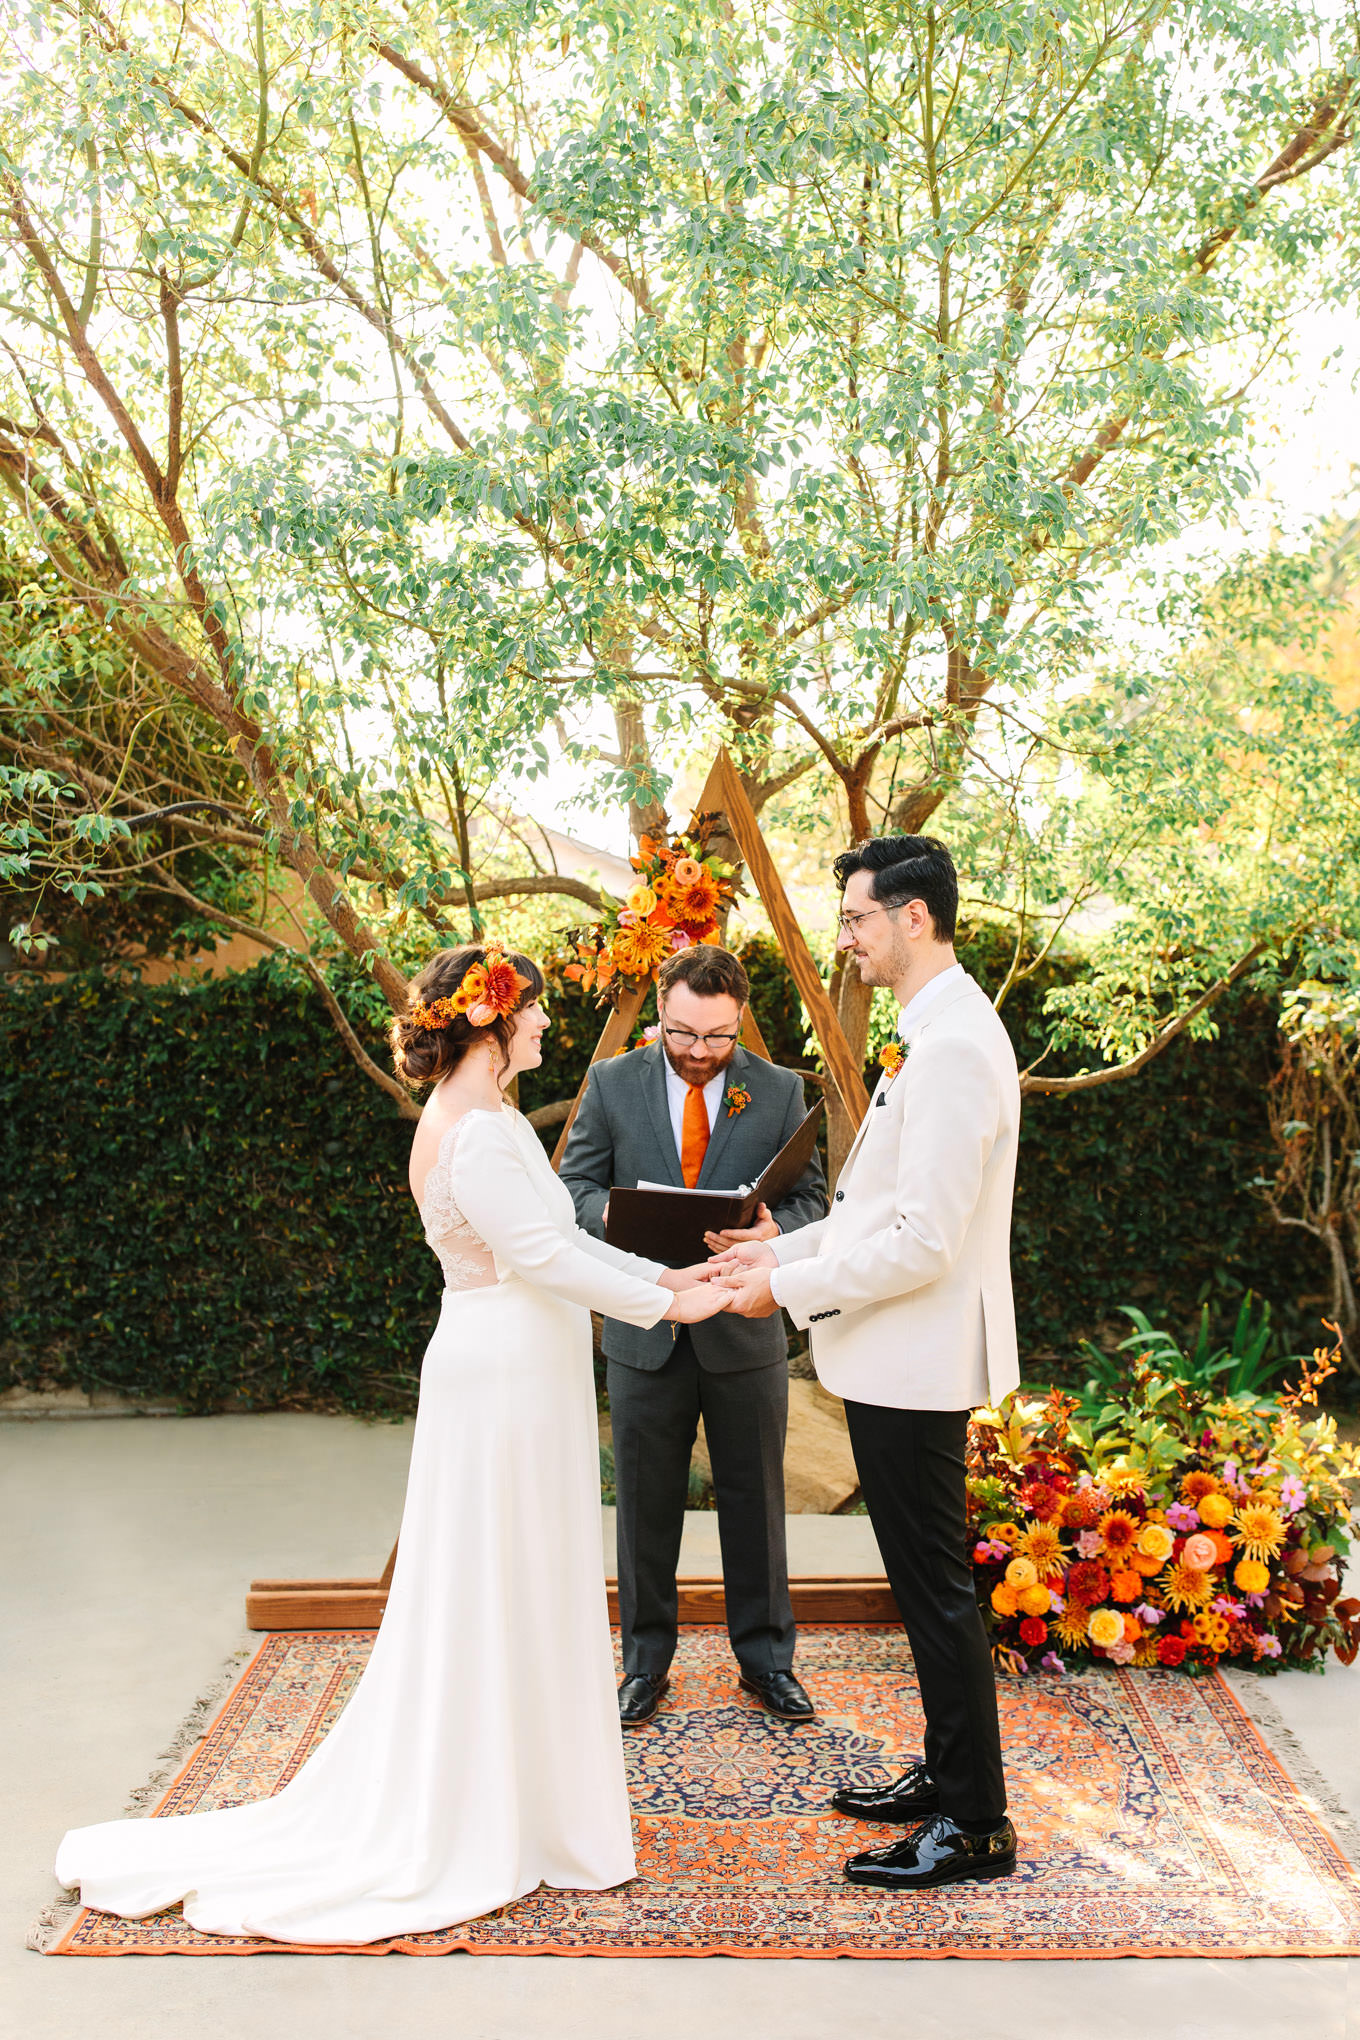 Ceremony photo with unique backdrop | Vibrant backyard micro wedding featured on Green Wedding Shoes | Colorful LA wedding photography | #losangeleswedding #backyardwedding #microwedding #laweddingphotographer Source: Mary Costa Photography | Los Angeles